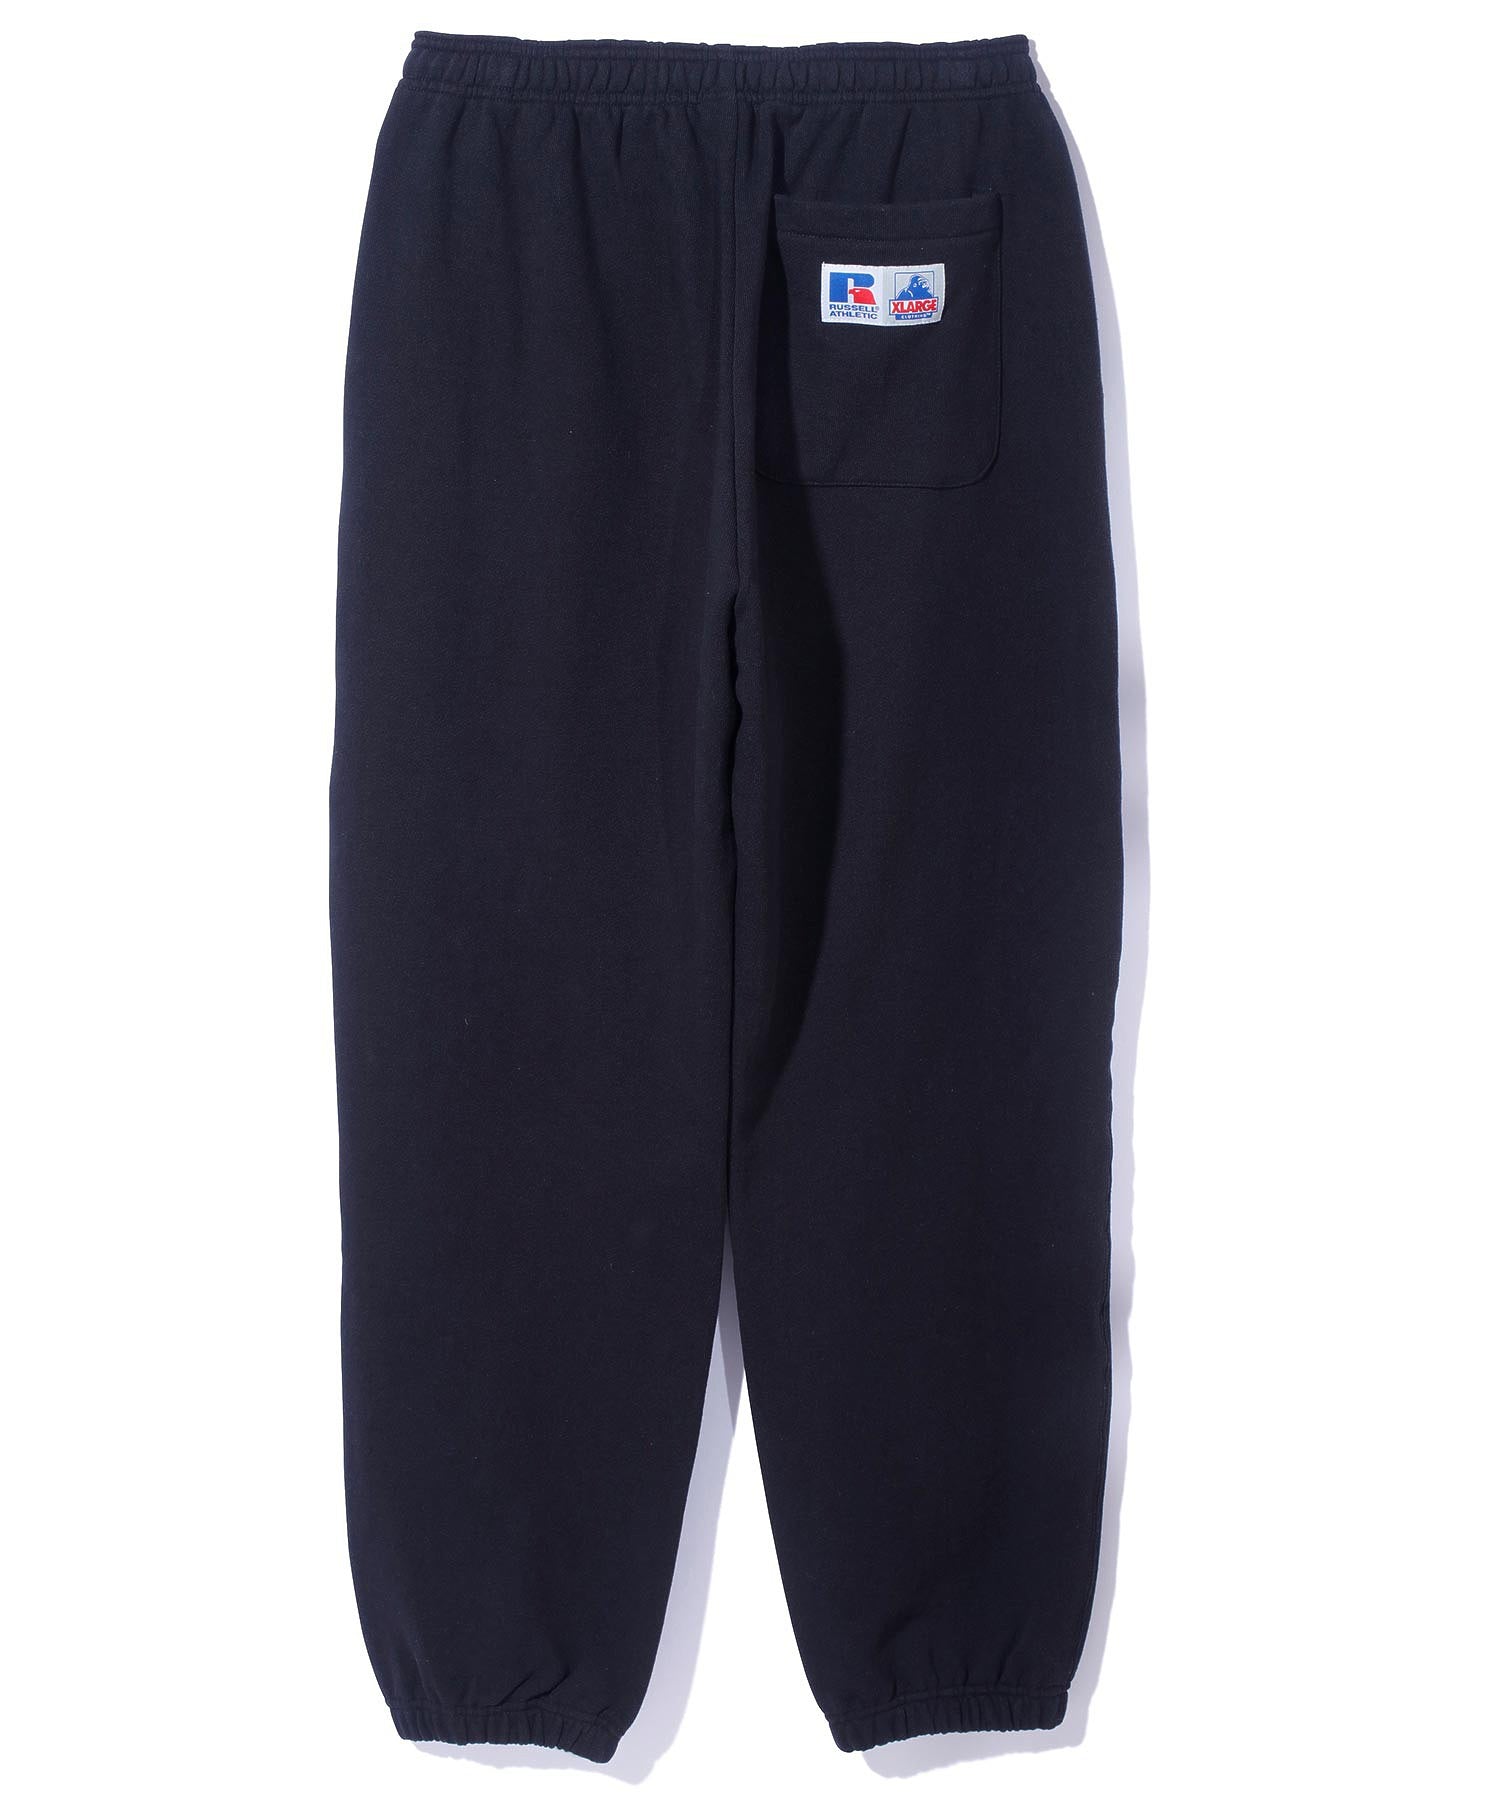  Russell Athletic Mens Big and Tall Open Bottom Lounge Pants -  Jersey Sweatpants Heather Grey : Clothing, Shoes & Jewelry